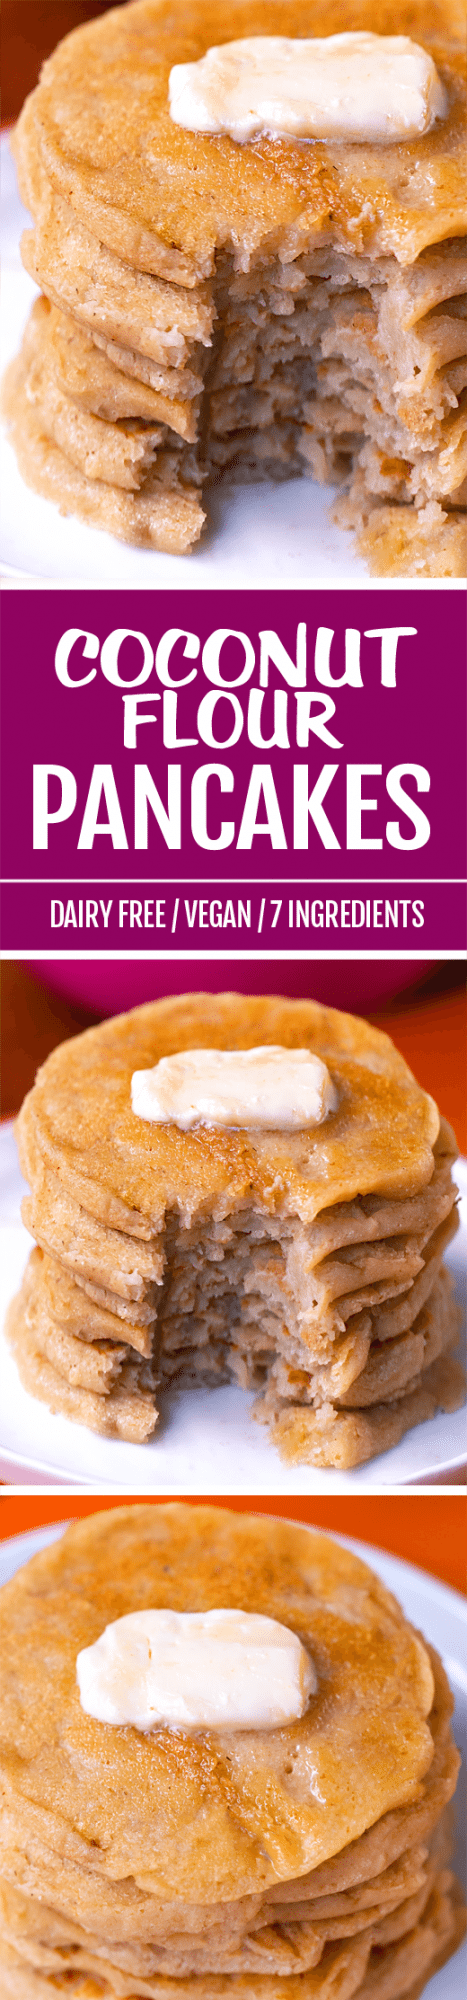 Soft, fluffy coconut flour pancakes made from scratch - with no eggs or gluten!